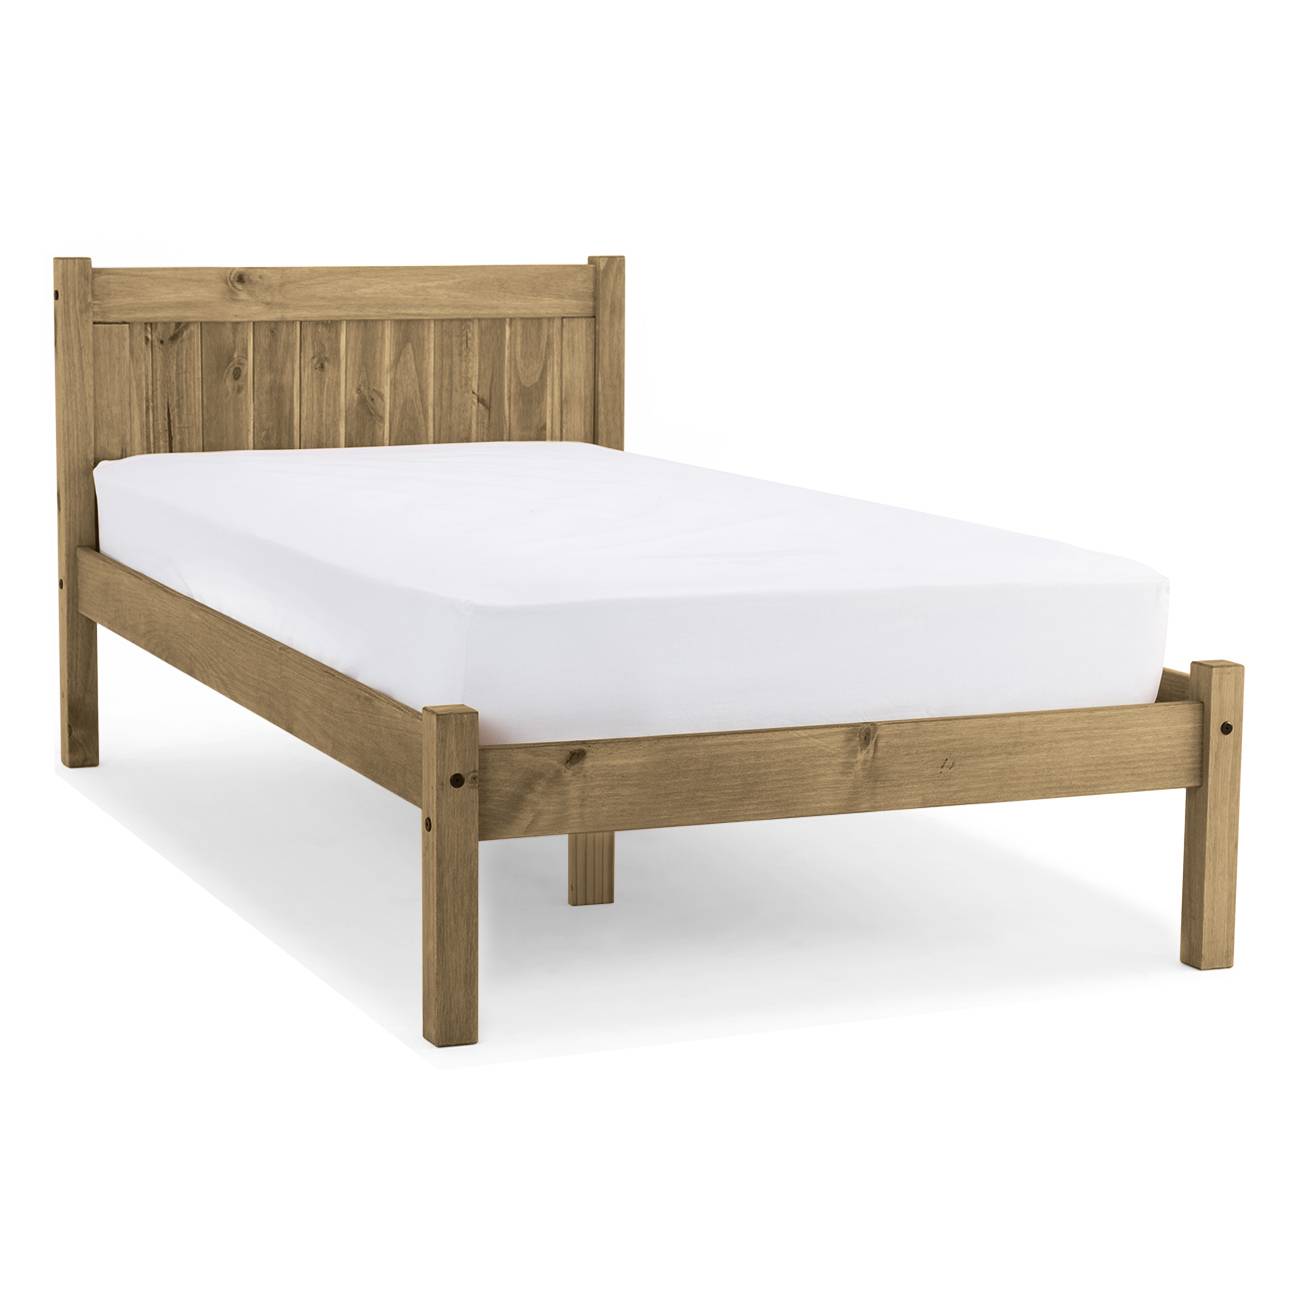 Single beds Maya bed frame single bed with Bettmeister pine cover quilted mattress single bed YDFSSCZ